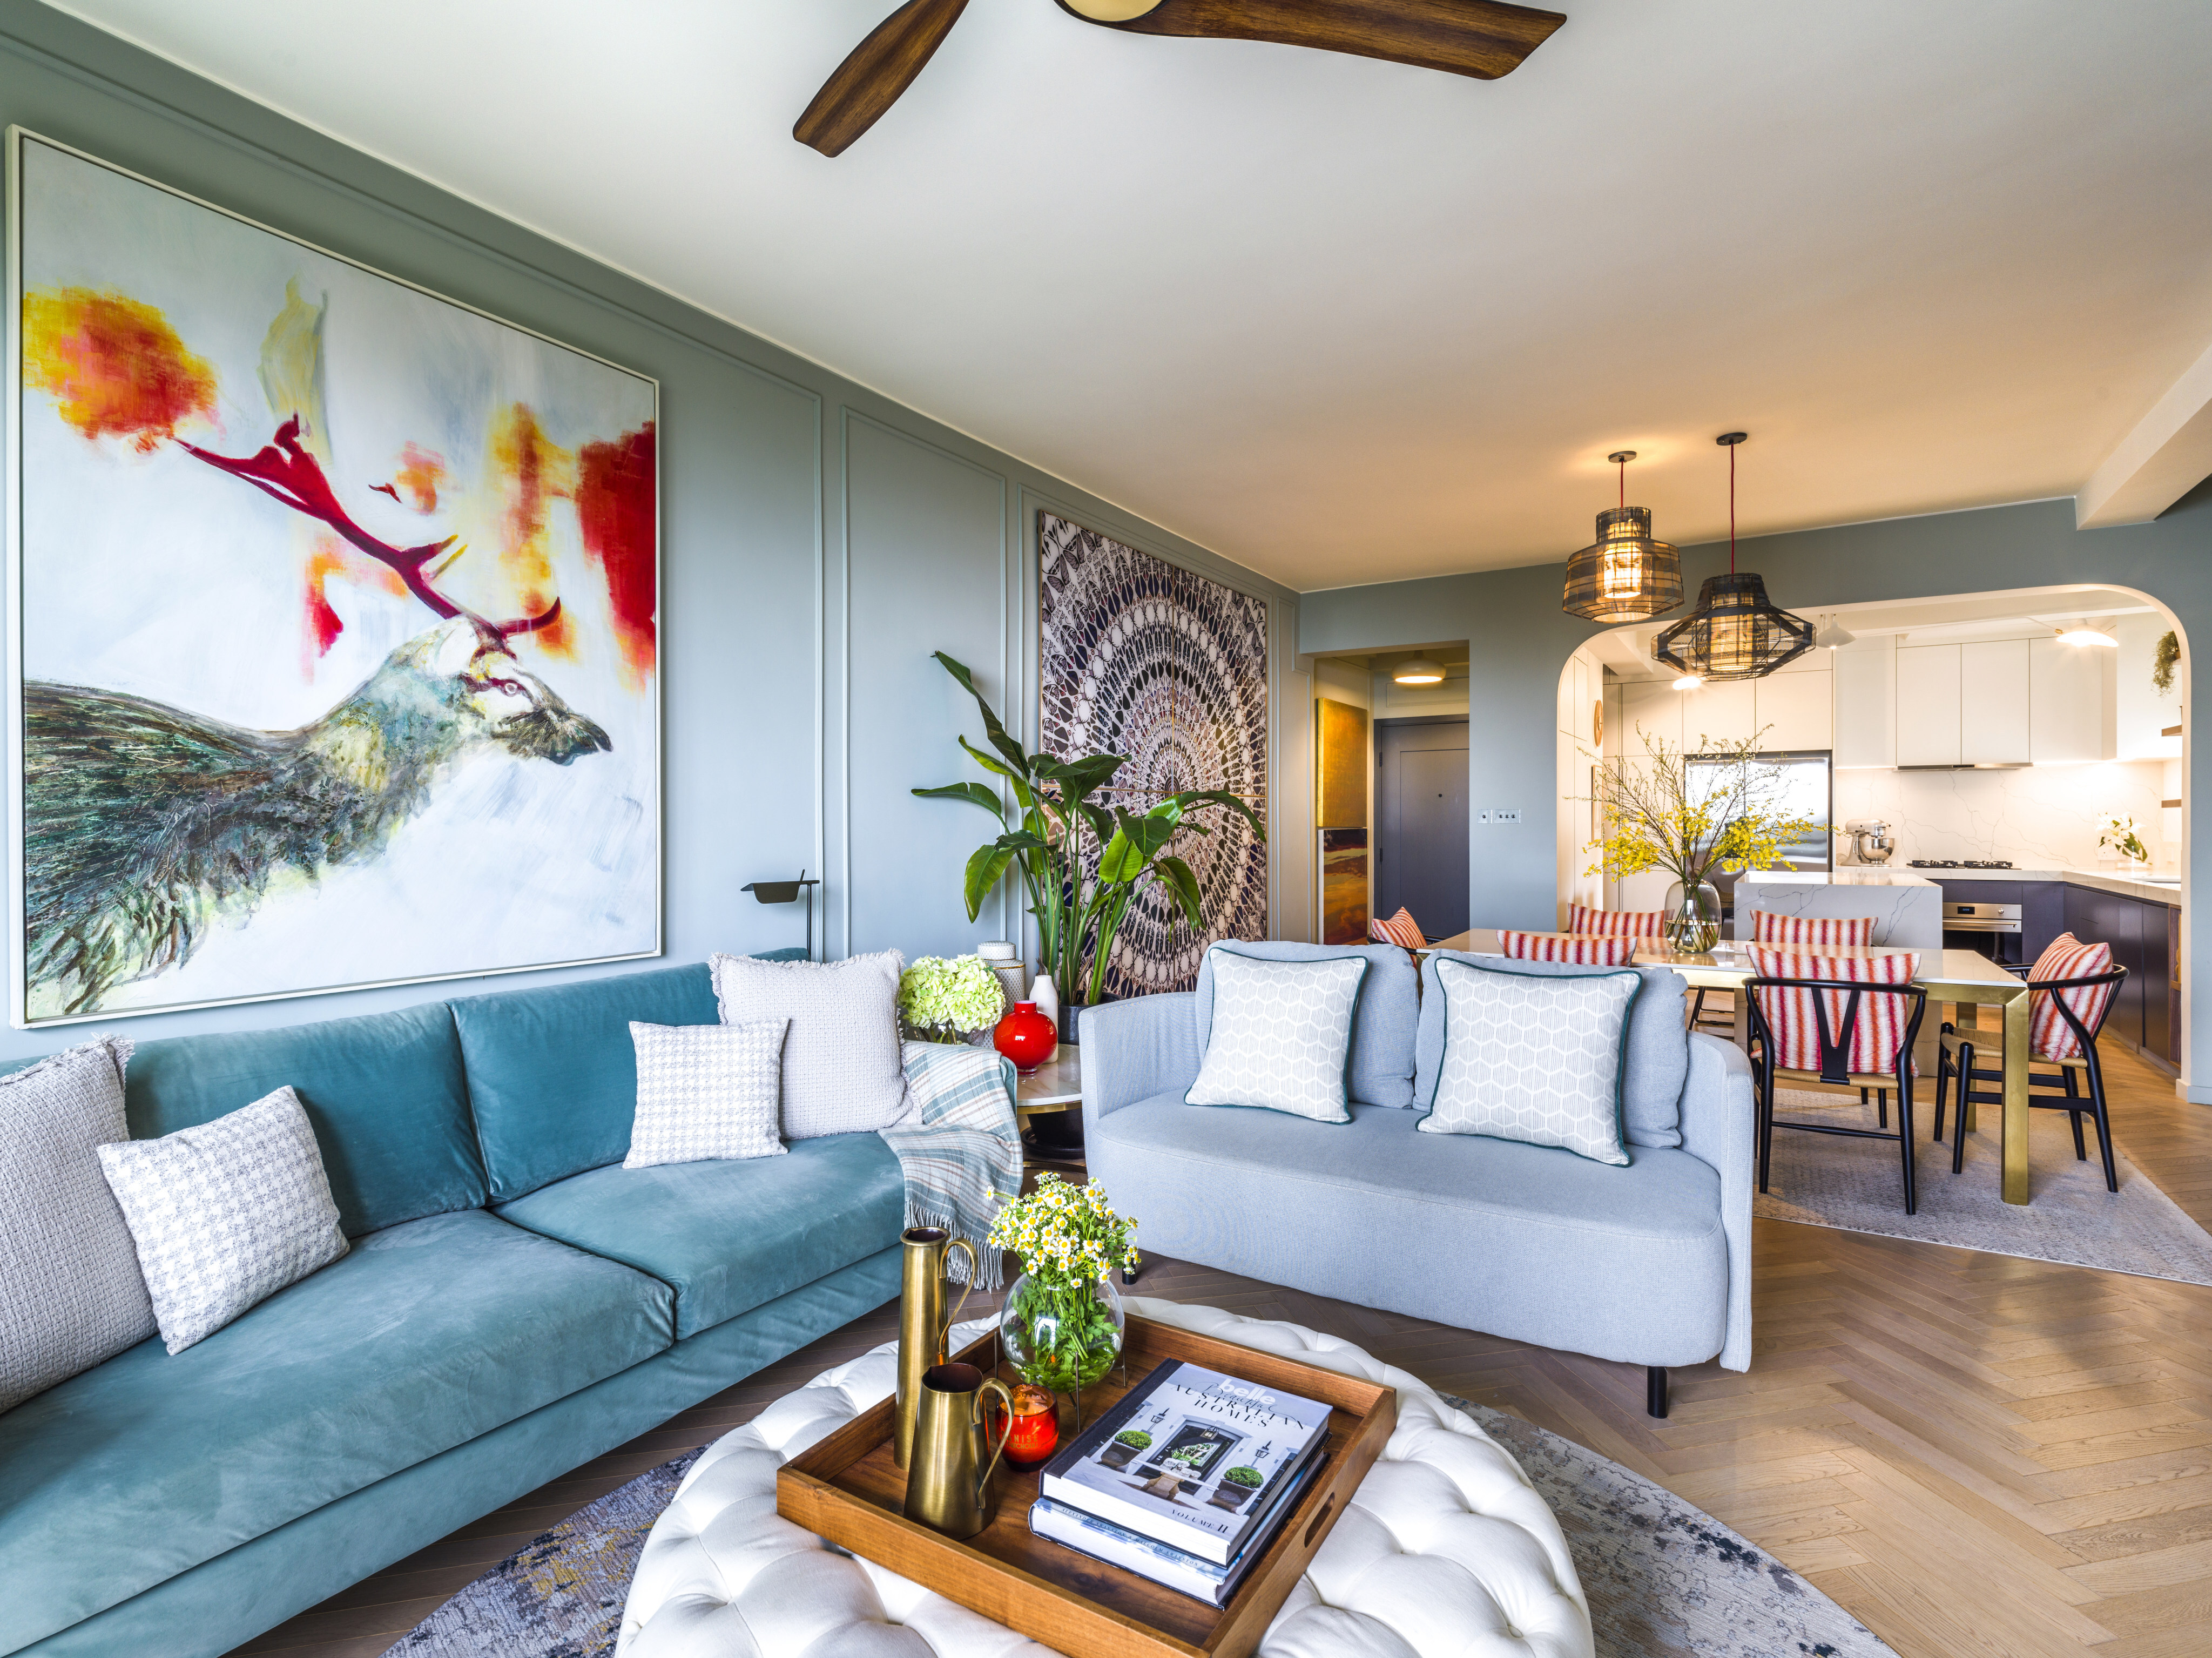 At this apartment in Pok Fu Lam, Hong Kong, designed by Rosheen Rodwell Interiors, a treasured painting provides the living area’s colour palette for a family of four. Photo: John Butlin